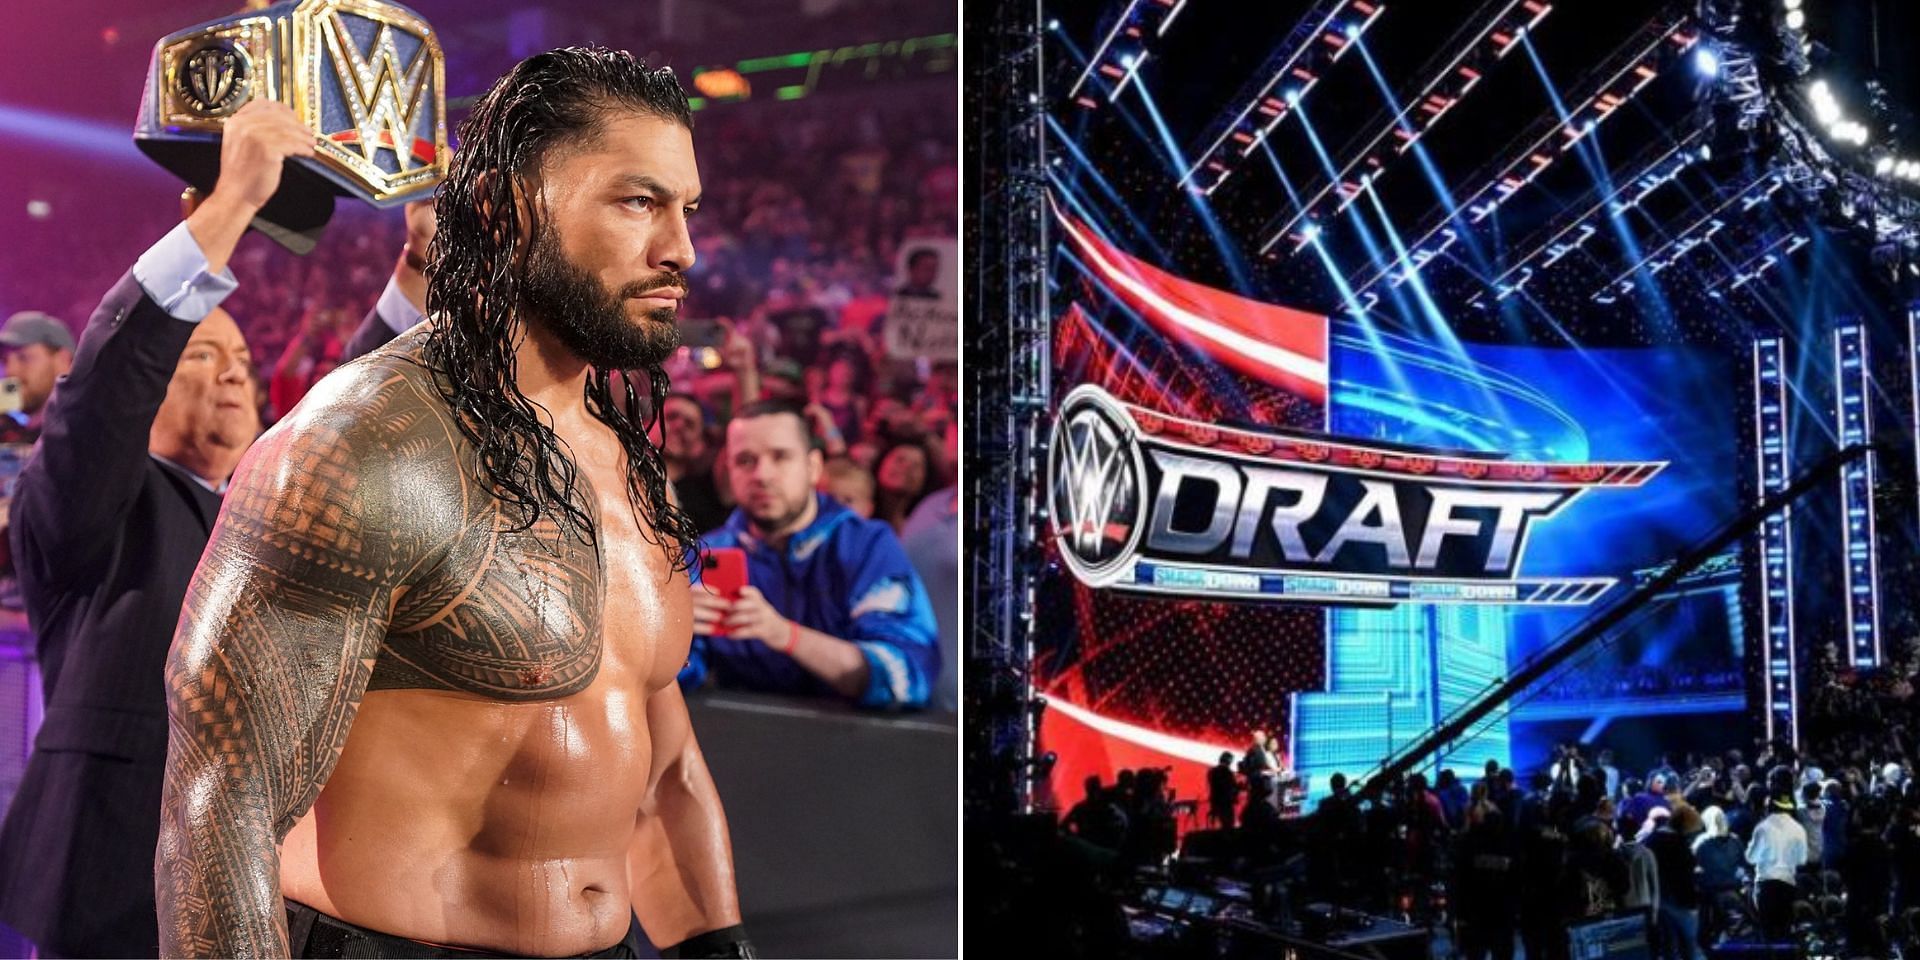 Roman Reigns was drfated to WWE SmackDown